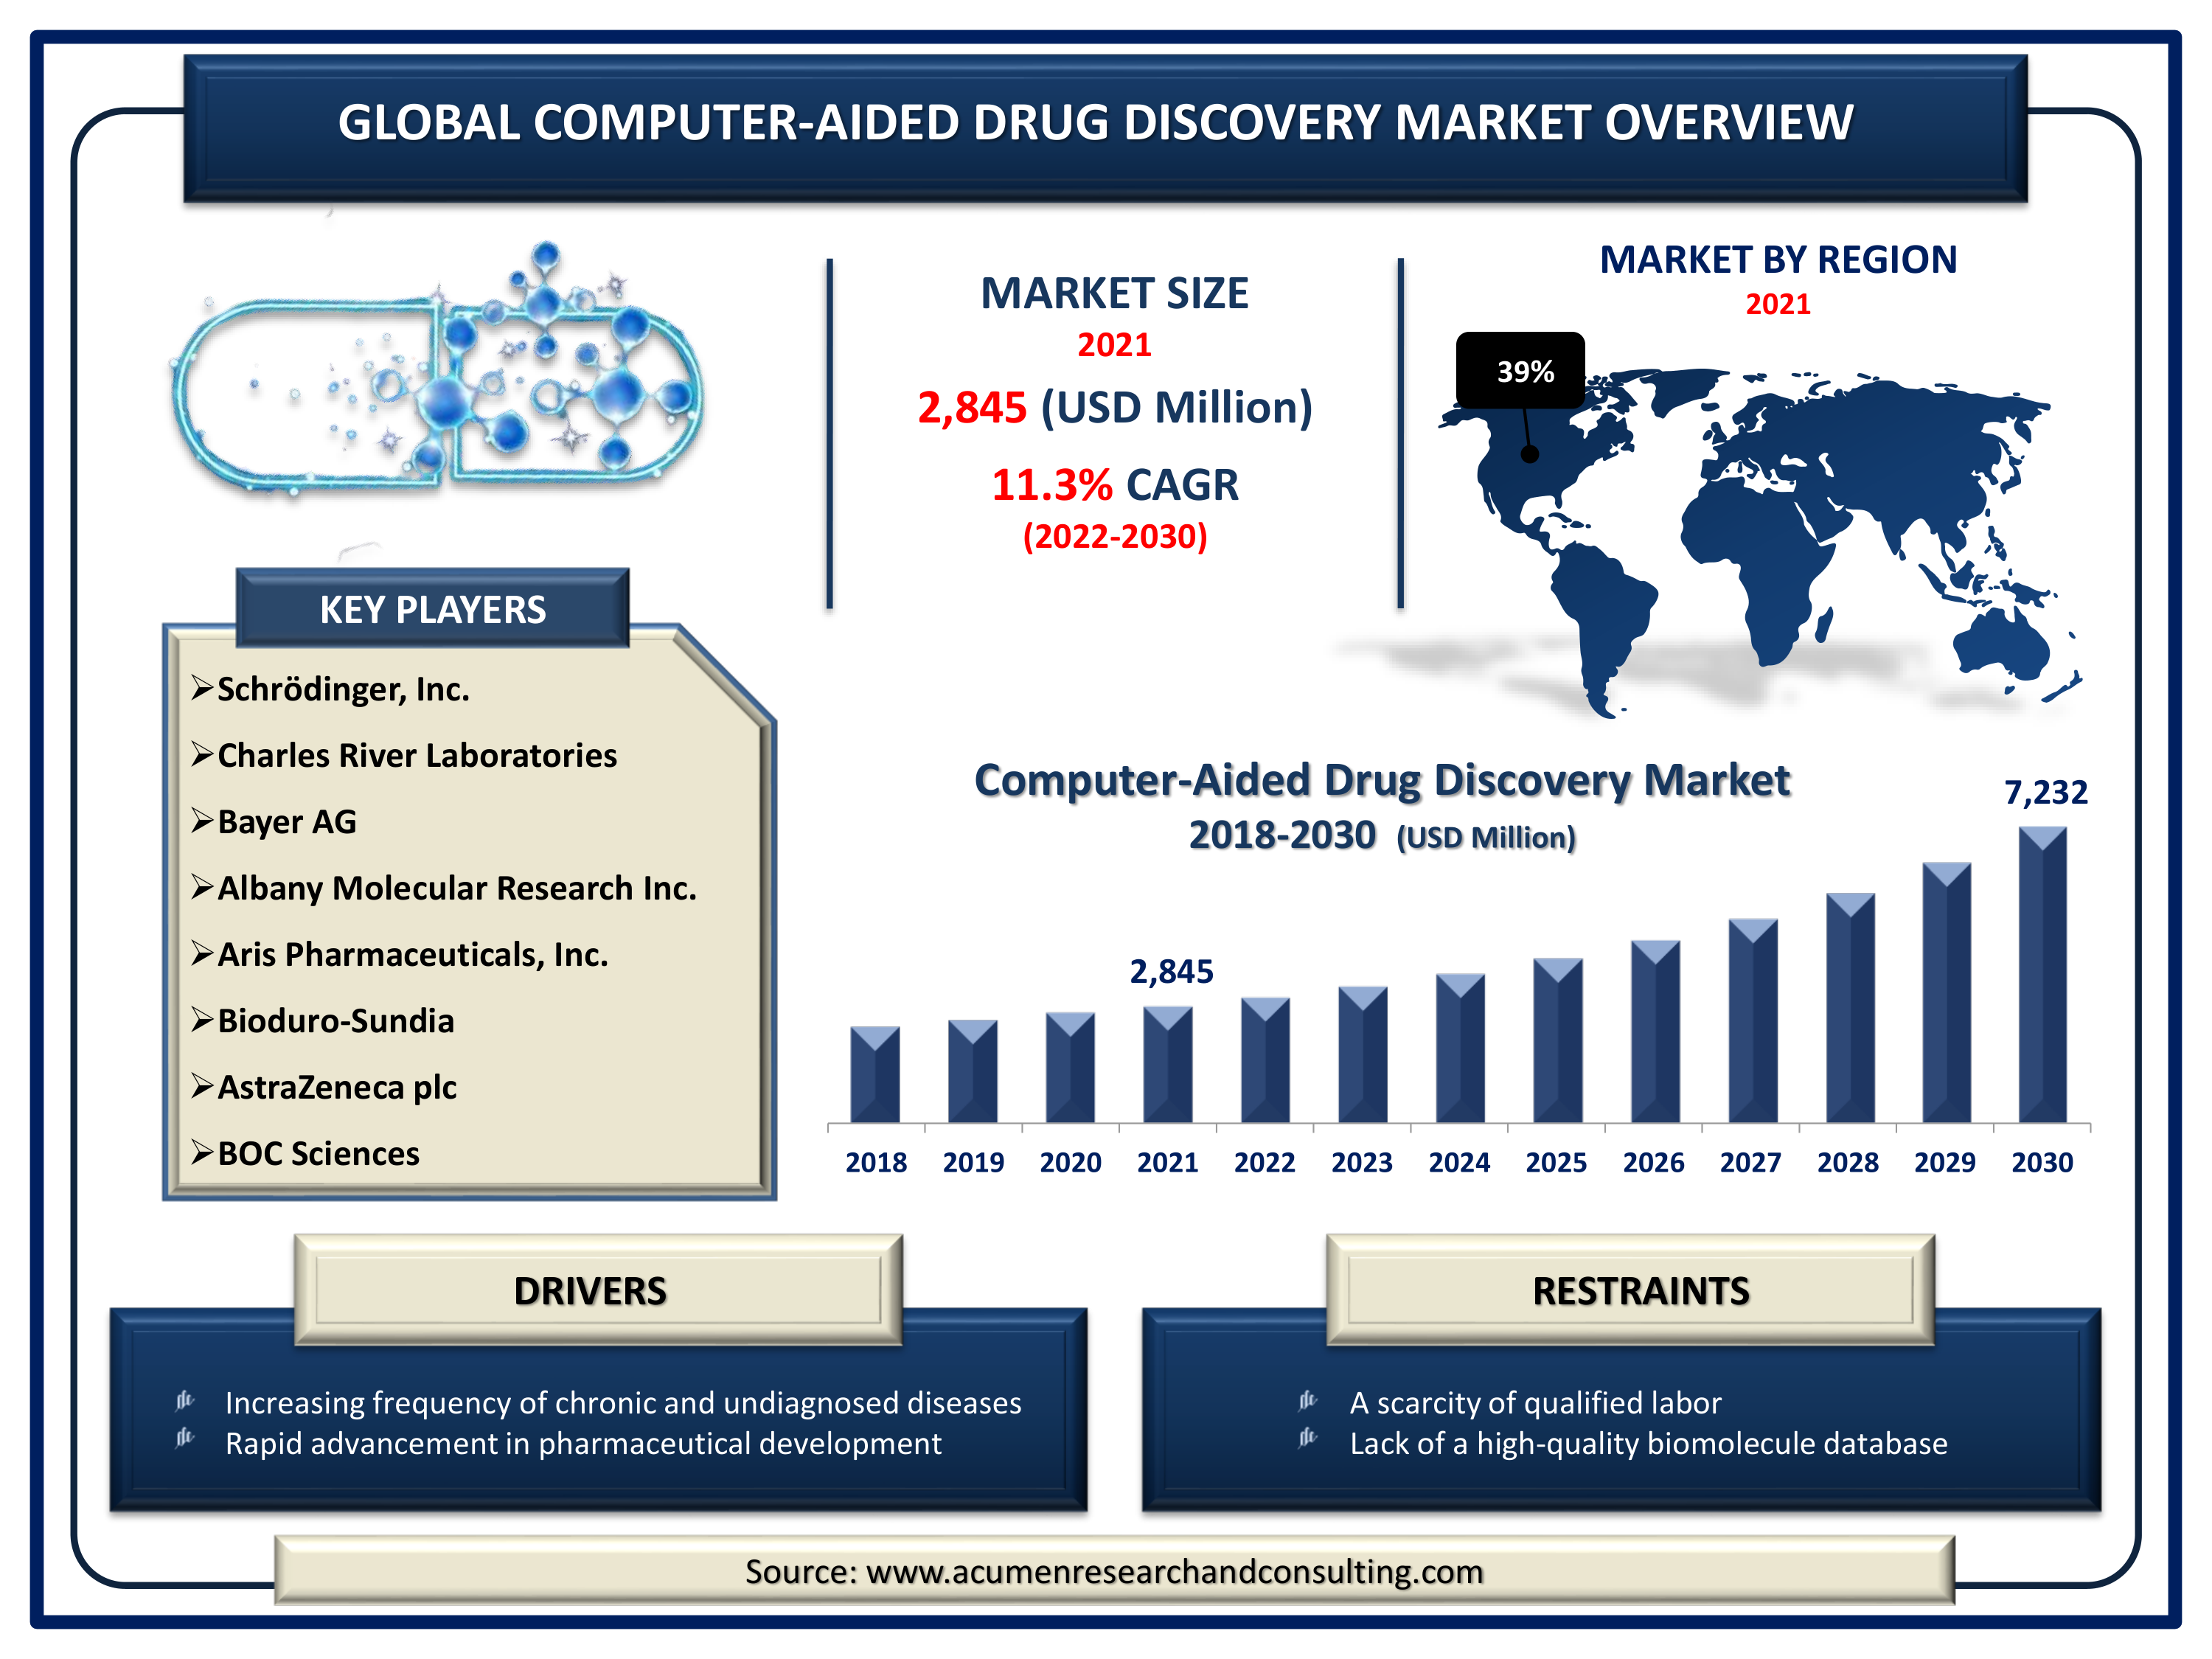 Computer-Aided Drug Discovery Market is predicted to be worth USD 7,232 Million by 2030, with a CAGR of 11.3%